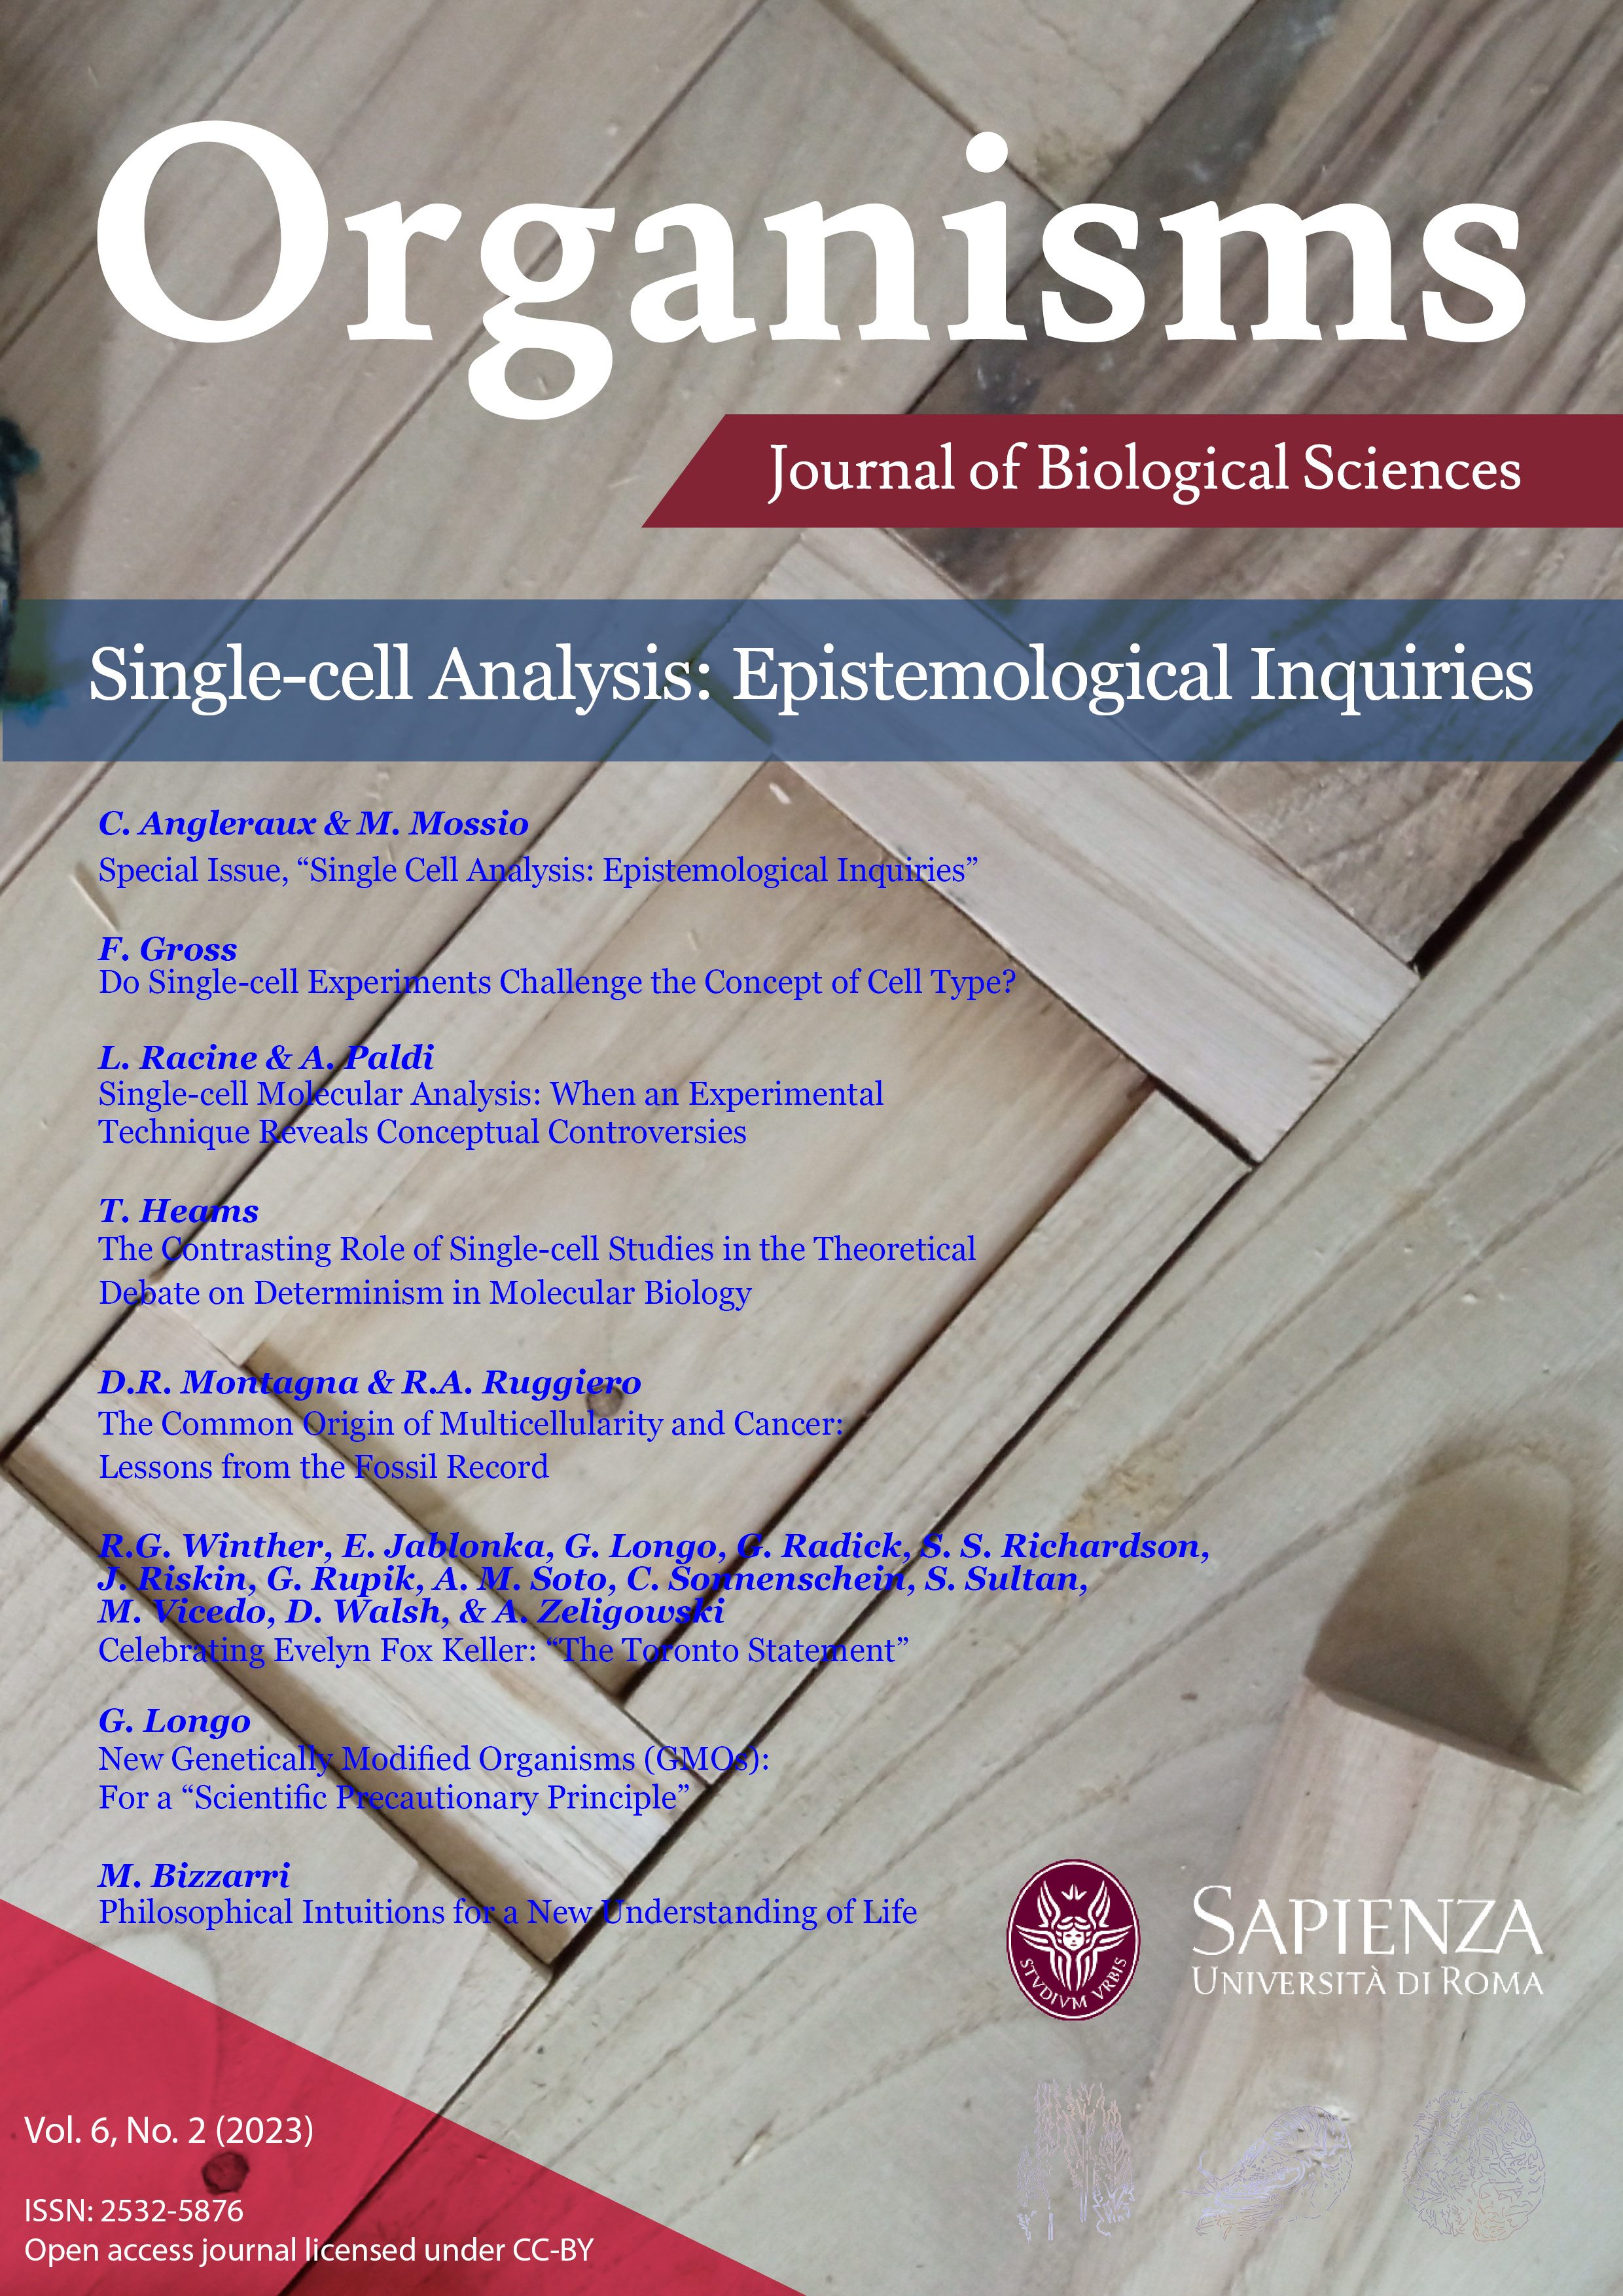 					View Vol. 6 No. 2 (2023): Special Issue, Single-cell Analysis: Epistemological Inquiries
				